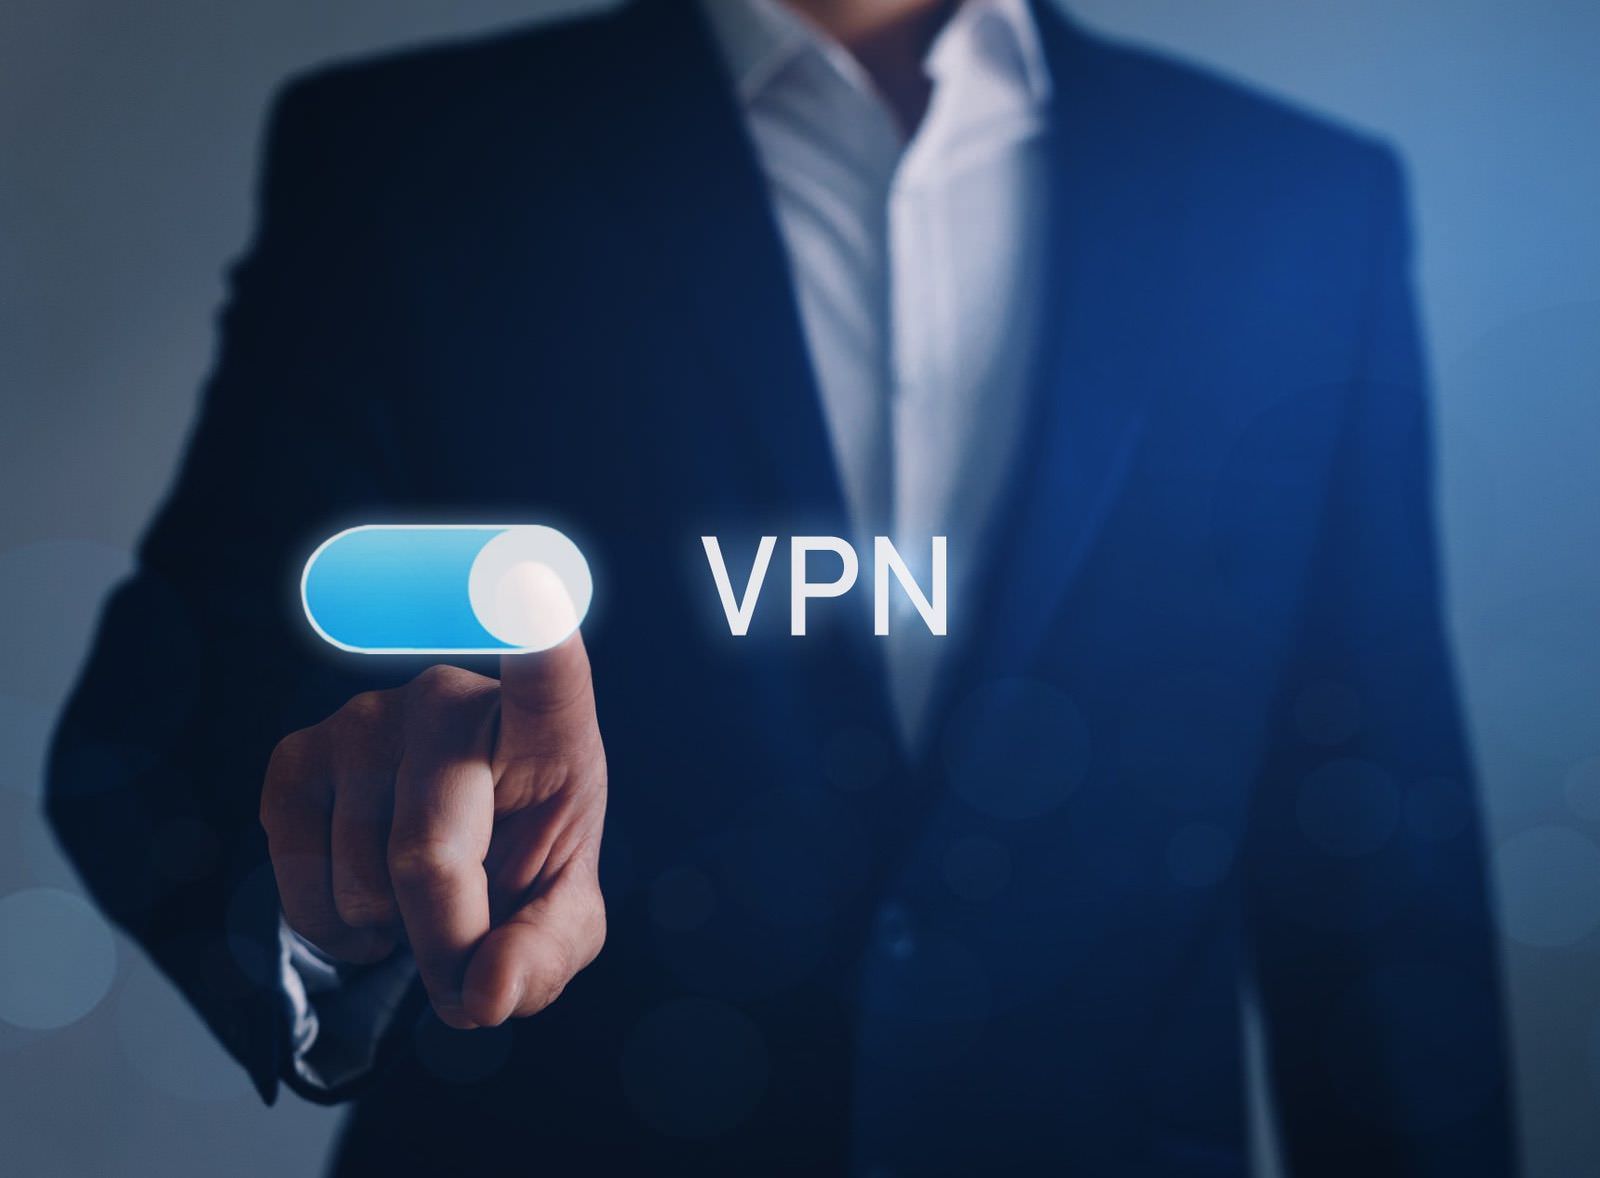 Protecting Hotel Wi-Fi with a VPN